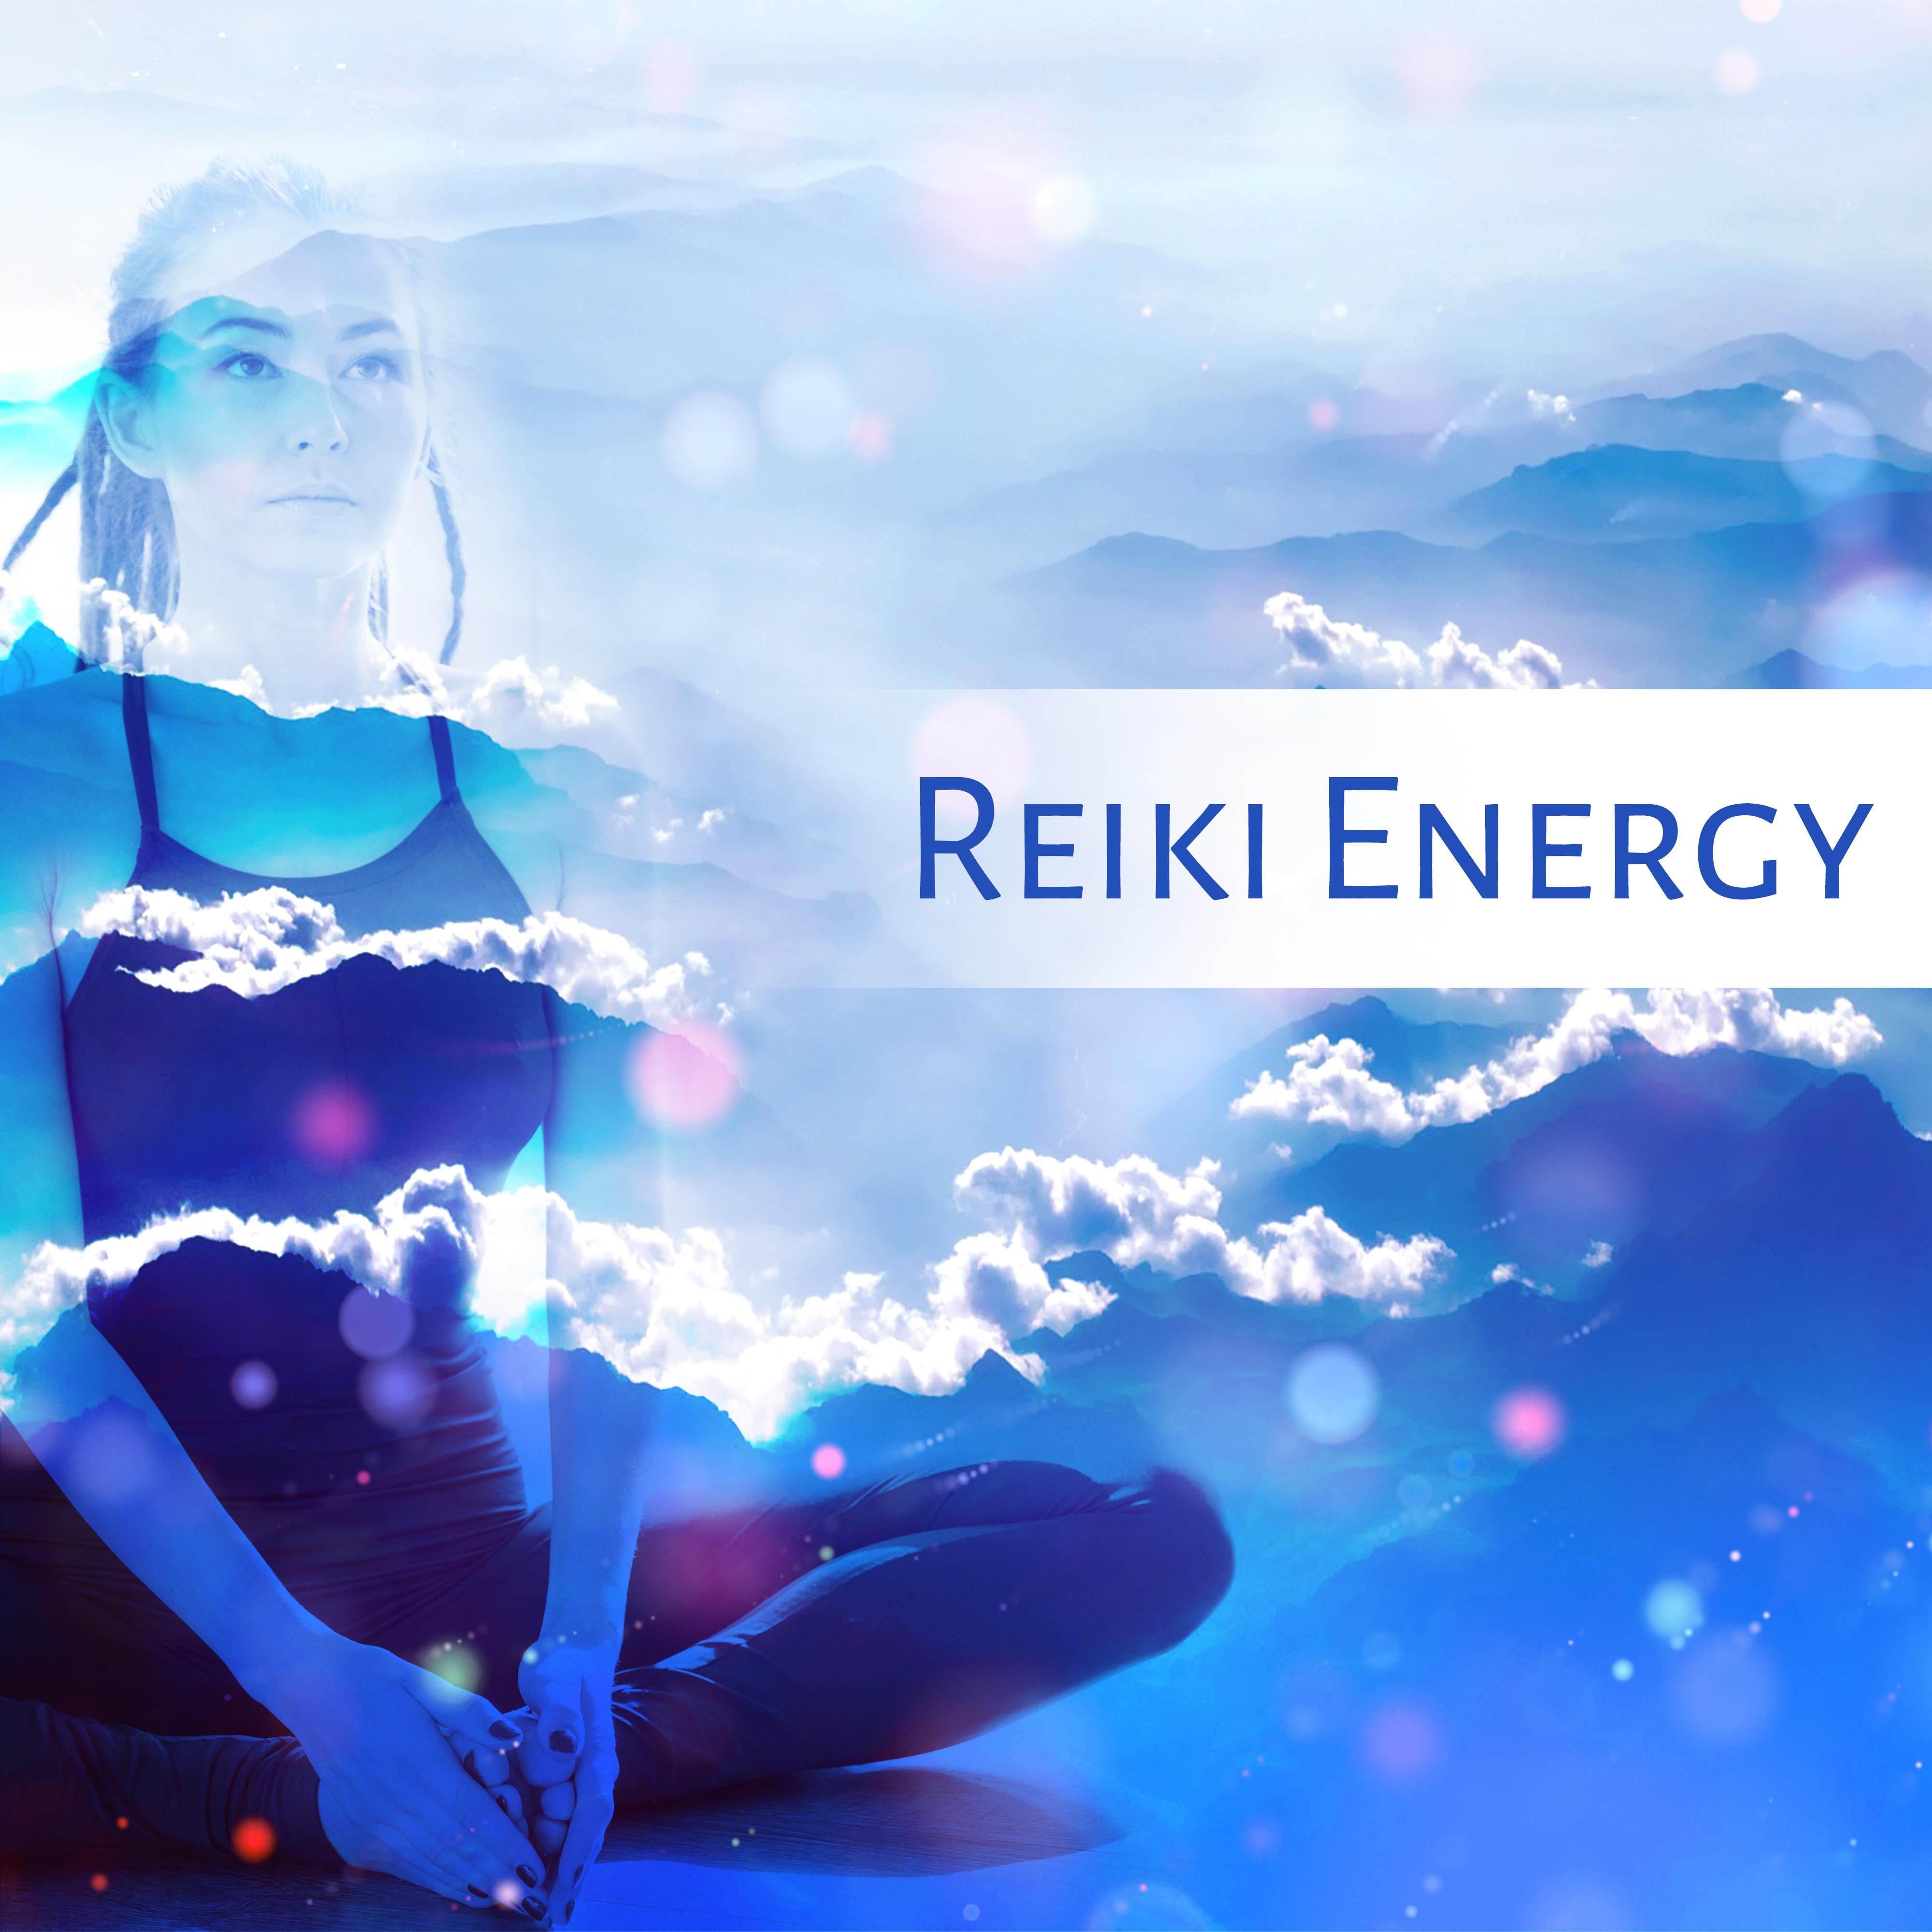 Reiki Energy  Healing Music for Meditation, Pure Mind, Deep Focus, Serenity Yoga, Peaceful Mind, Stress Relief